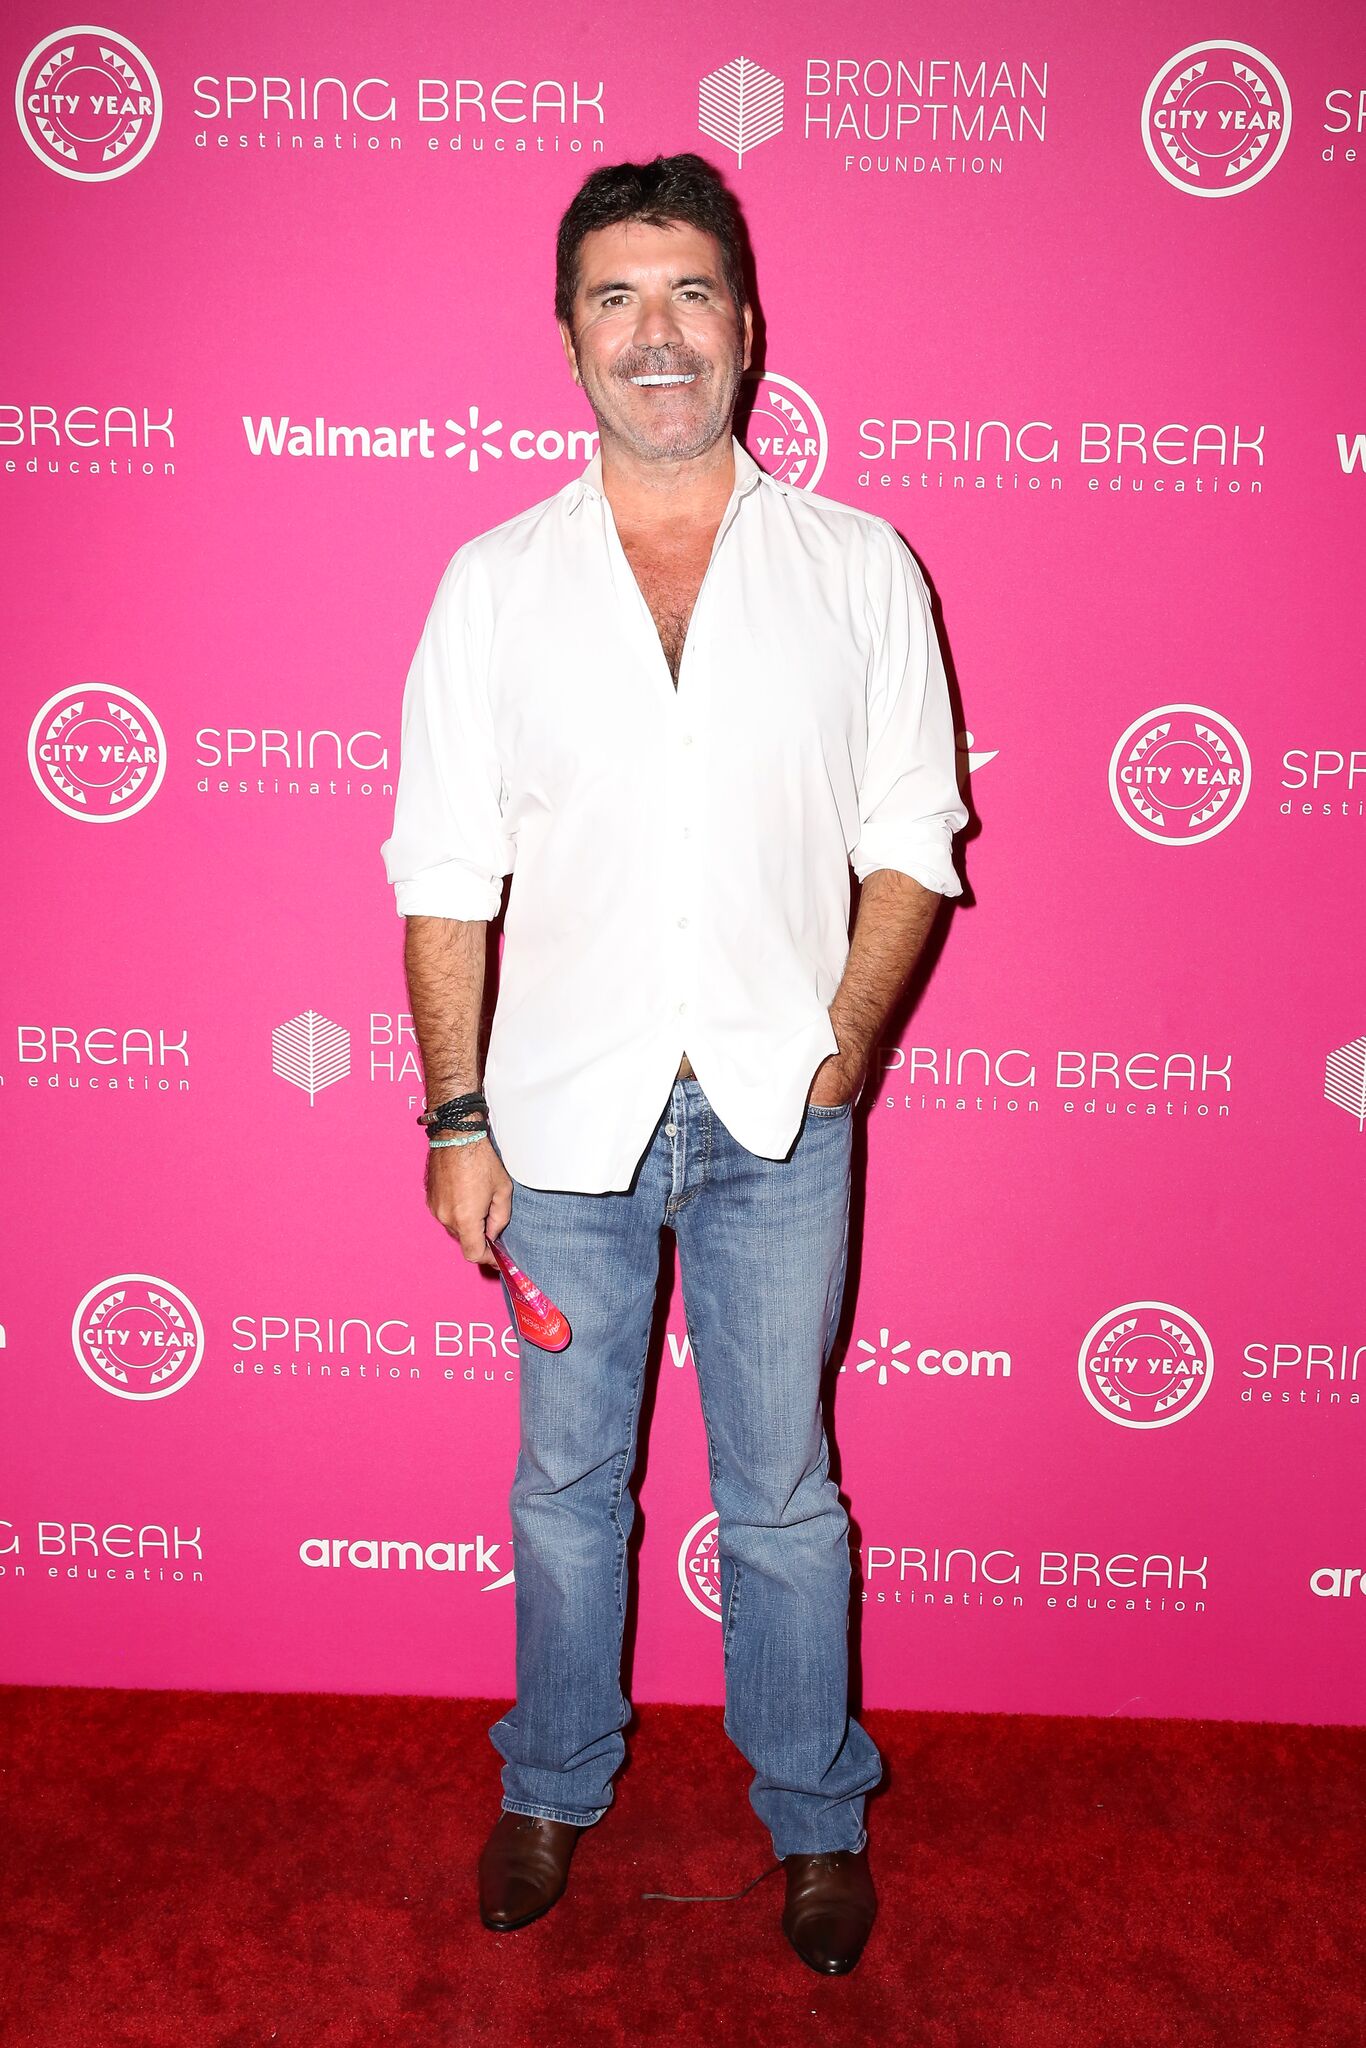  Simon Cowell attends City Year Los Angeles' Spring Break: Destination Education | Getty Images